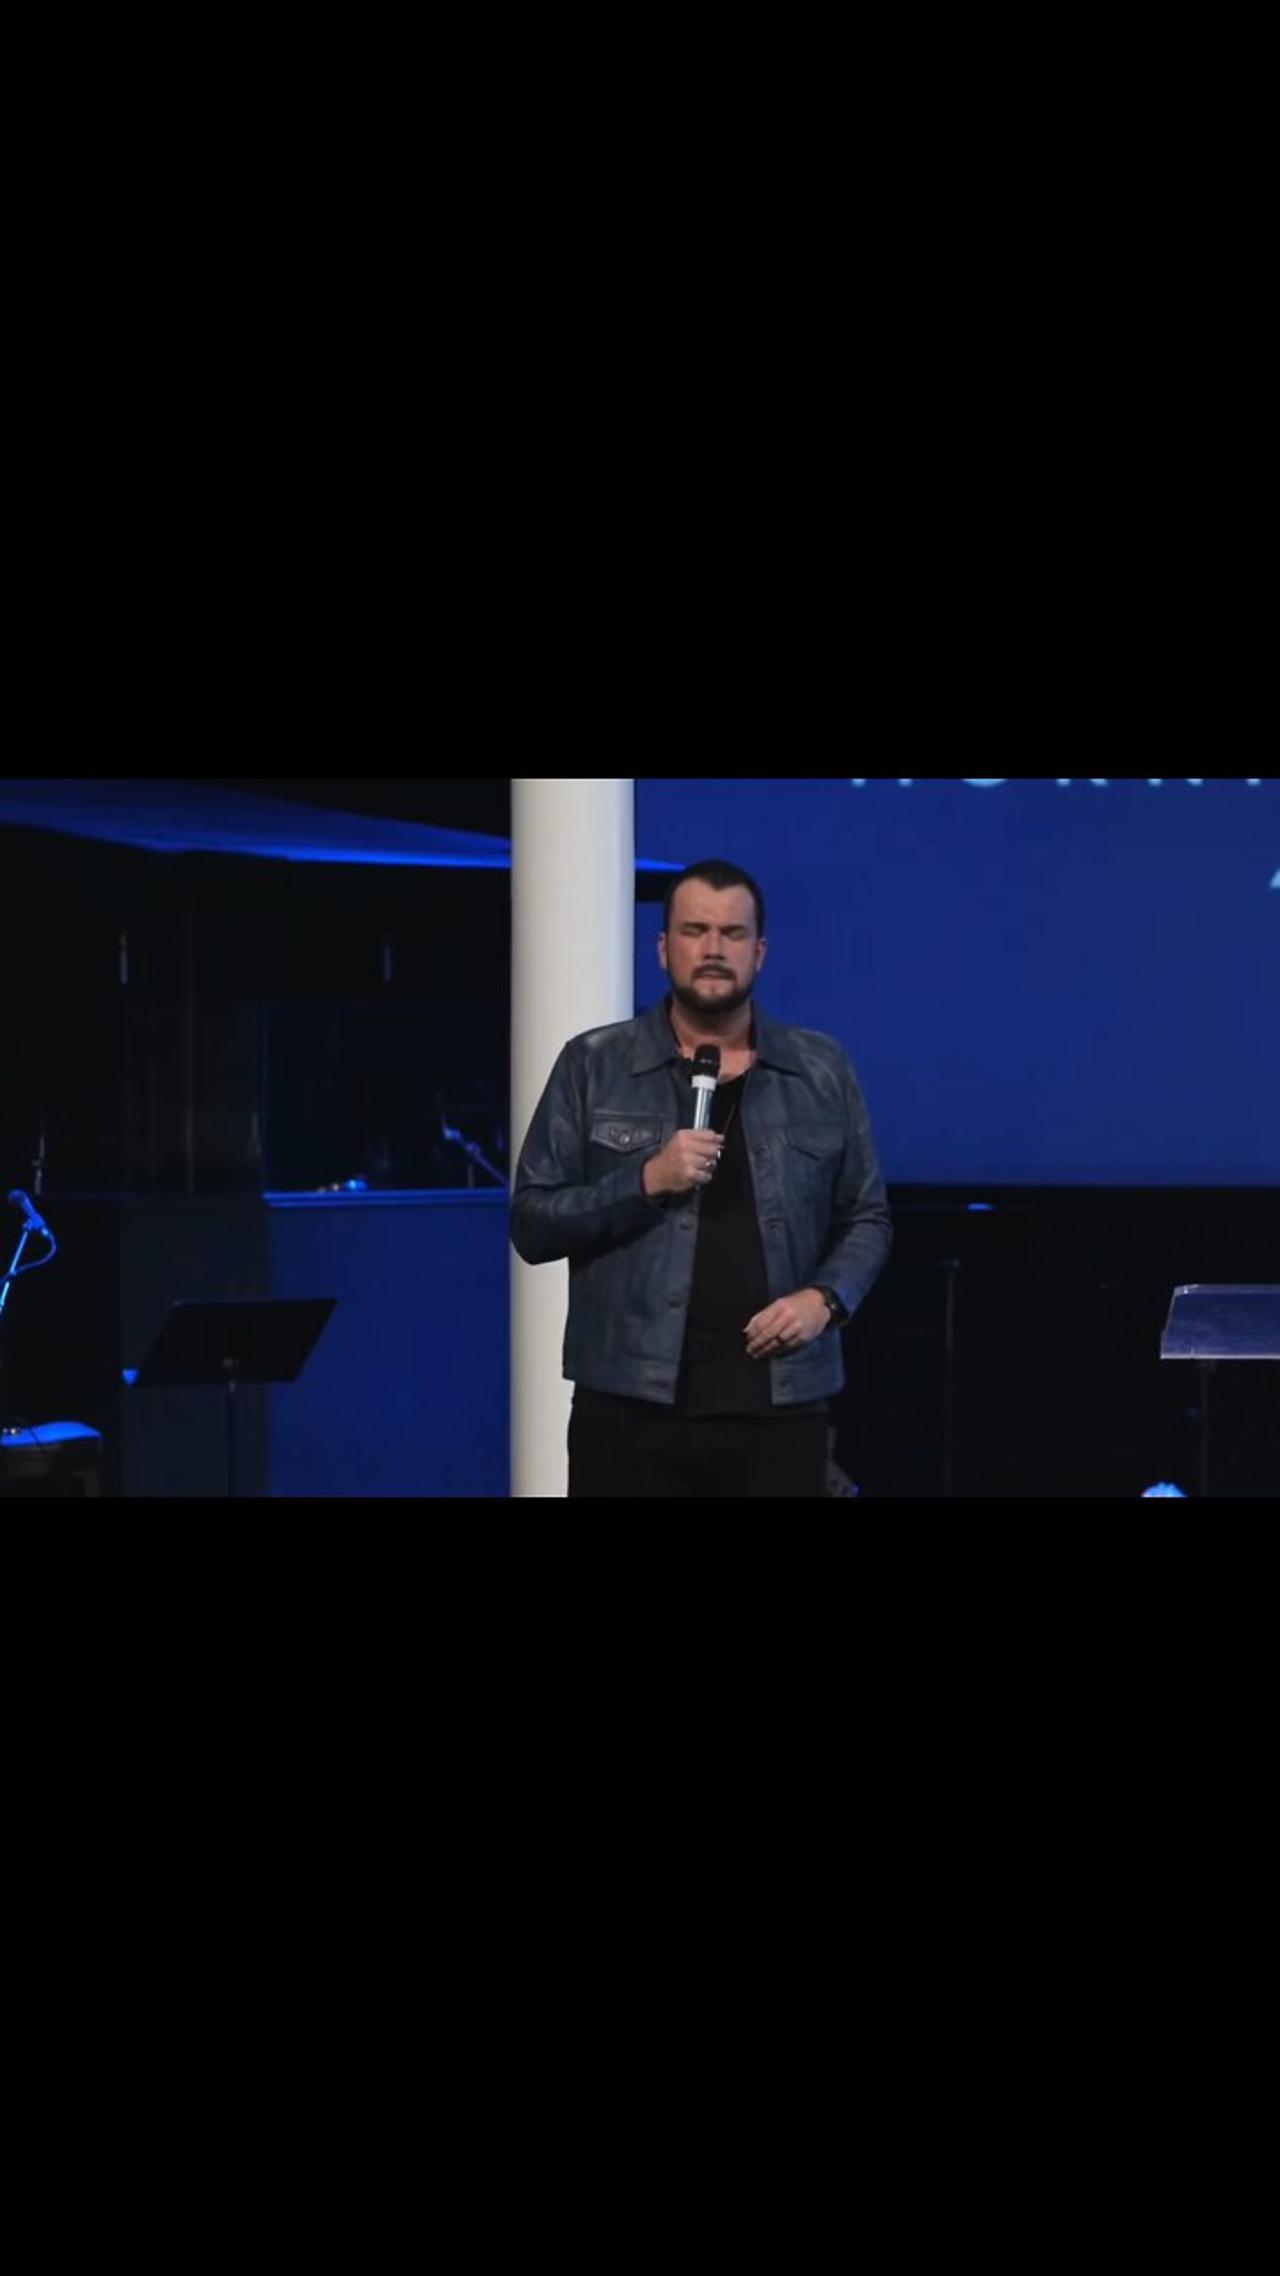 Chris Reed | Prophetic word brings deliverance and restored joy!